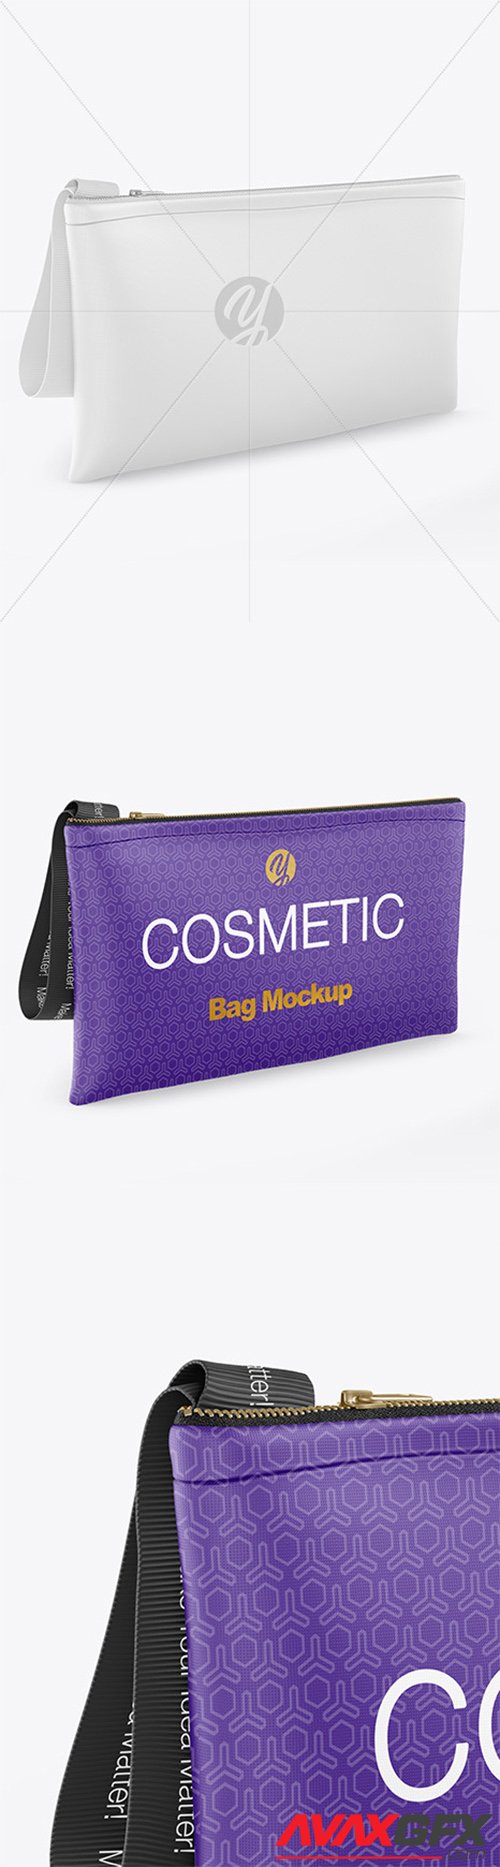 Download 46+ Glossy Cosmetic Bag Mockup Pictures Yellowimages - Free PSD Mockup Templates